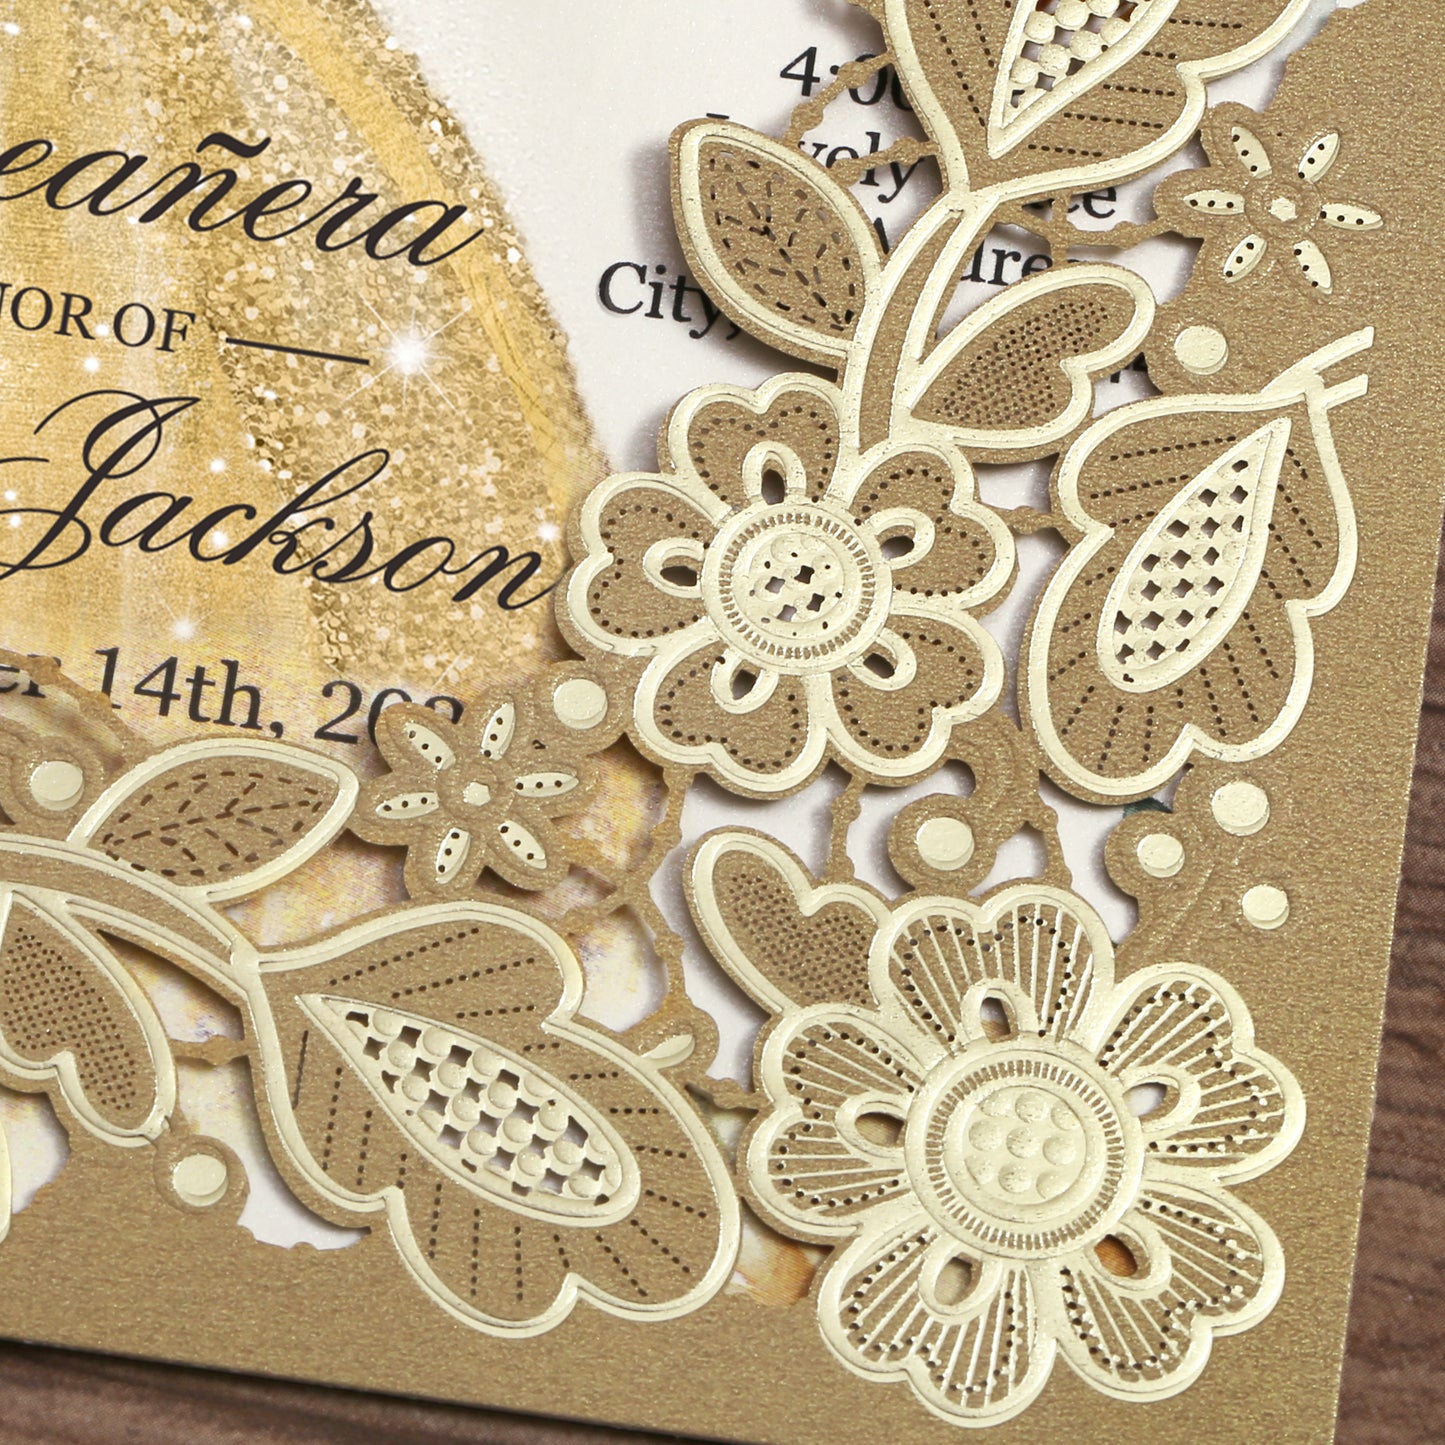 Customized Quinceanera Invitation Gold, Elegant 15 years Invitations Sweet 16, Miss XV, Birthday Laser Cut Quince Invitation Cards Gold Personalized